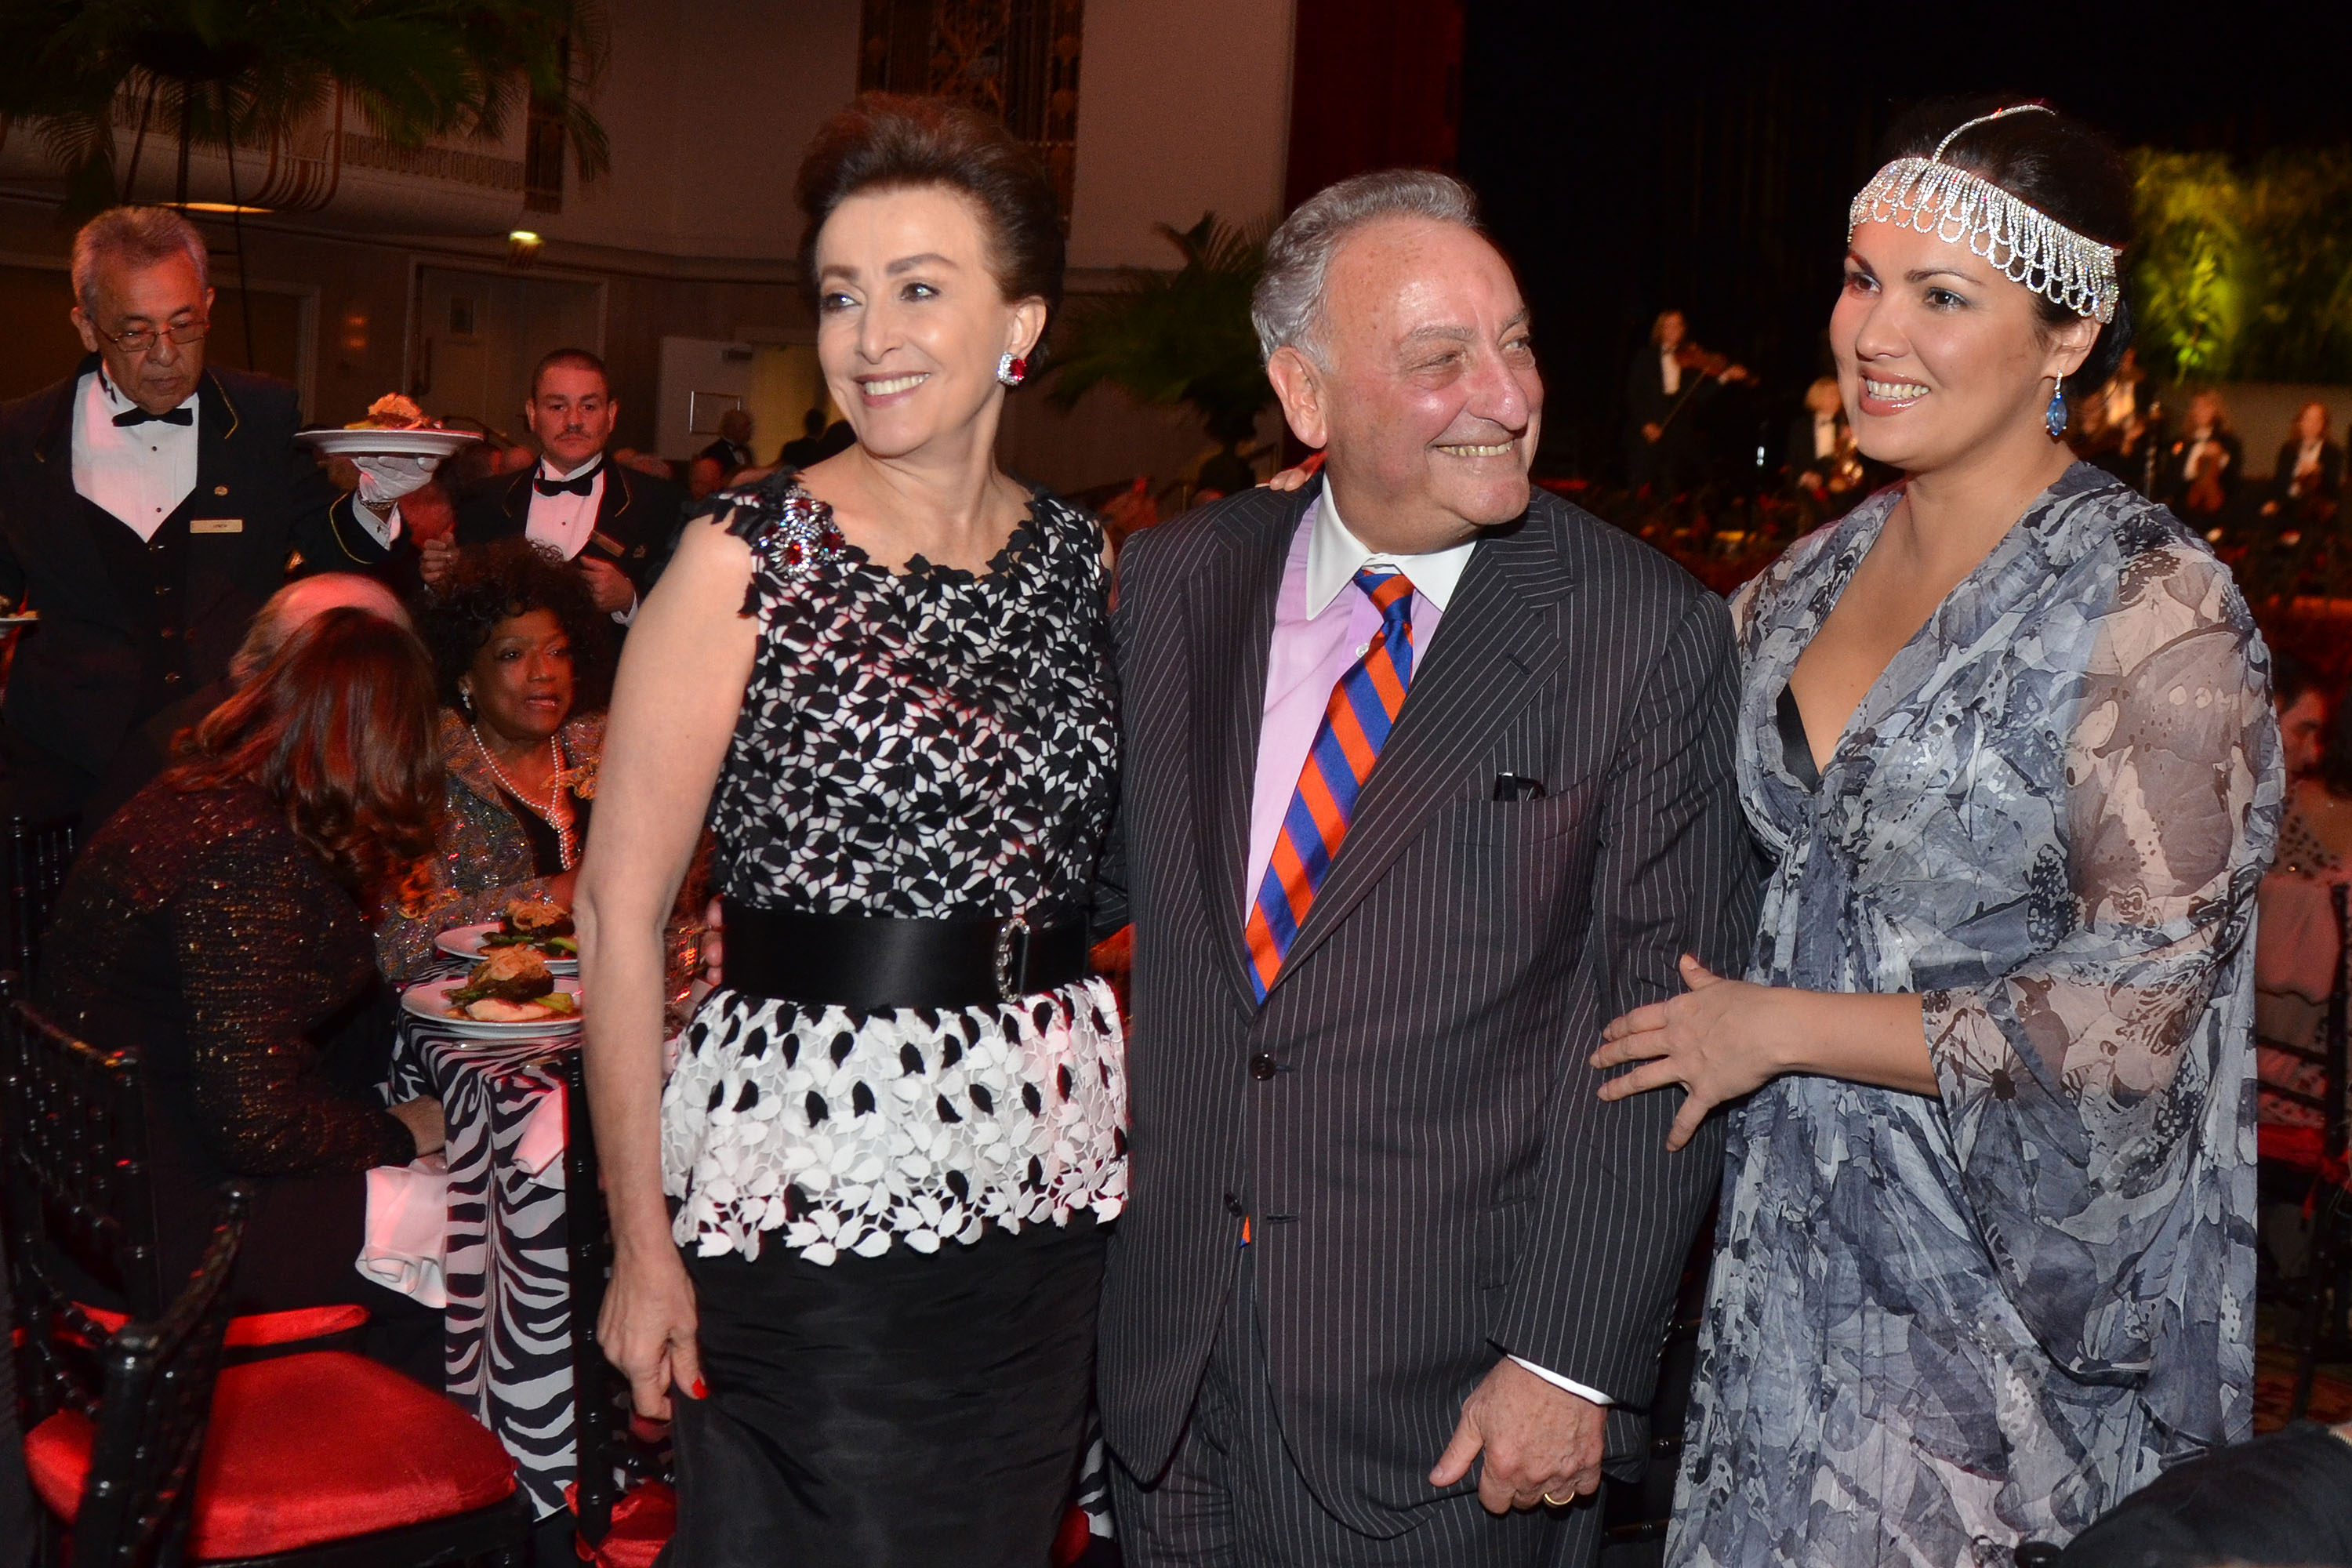 Mercedes Bass, acting chairman of Carnegie Hall, with Sandy Weill, a former chairman, and soprano Anna Netrebko.
